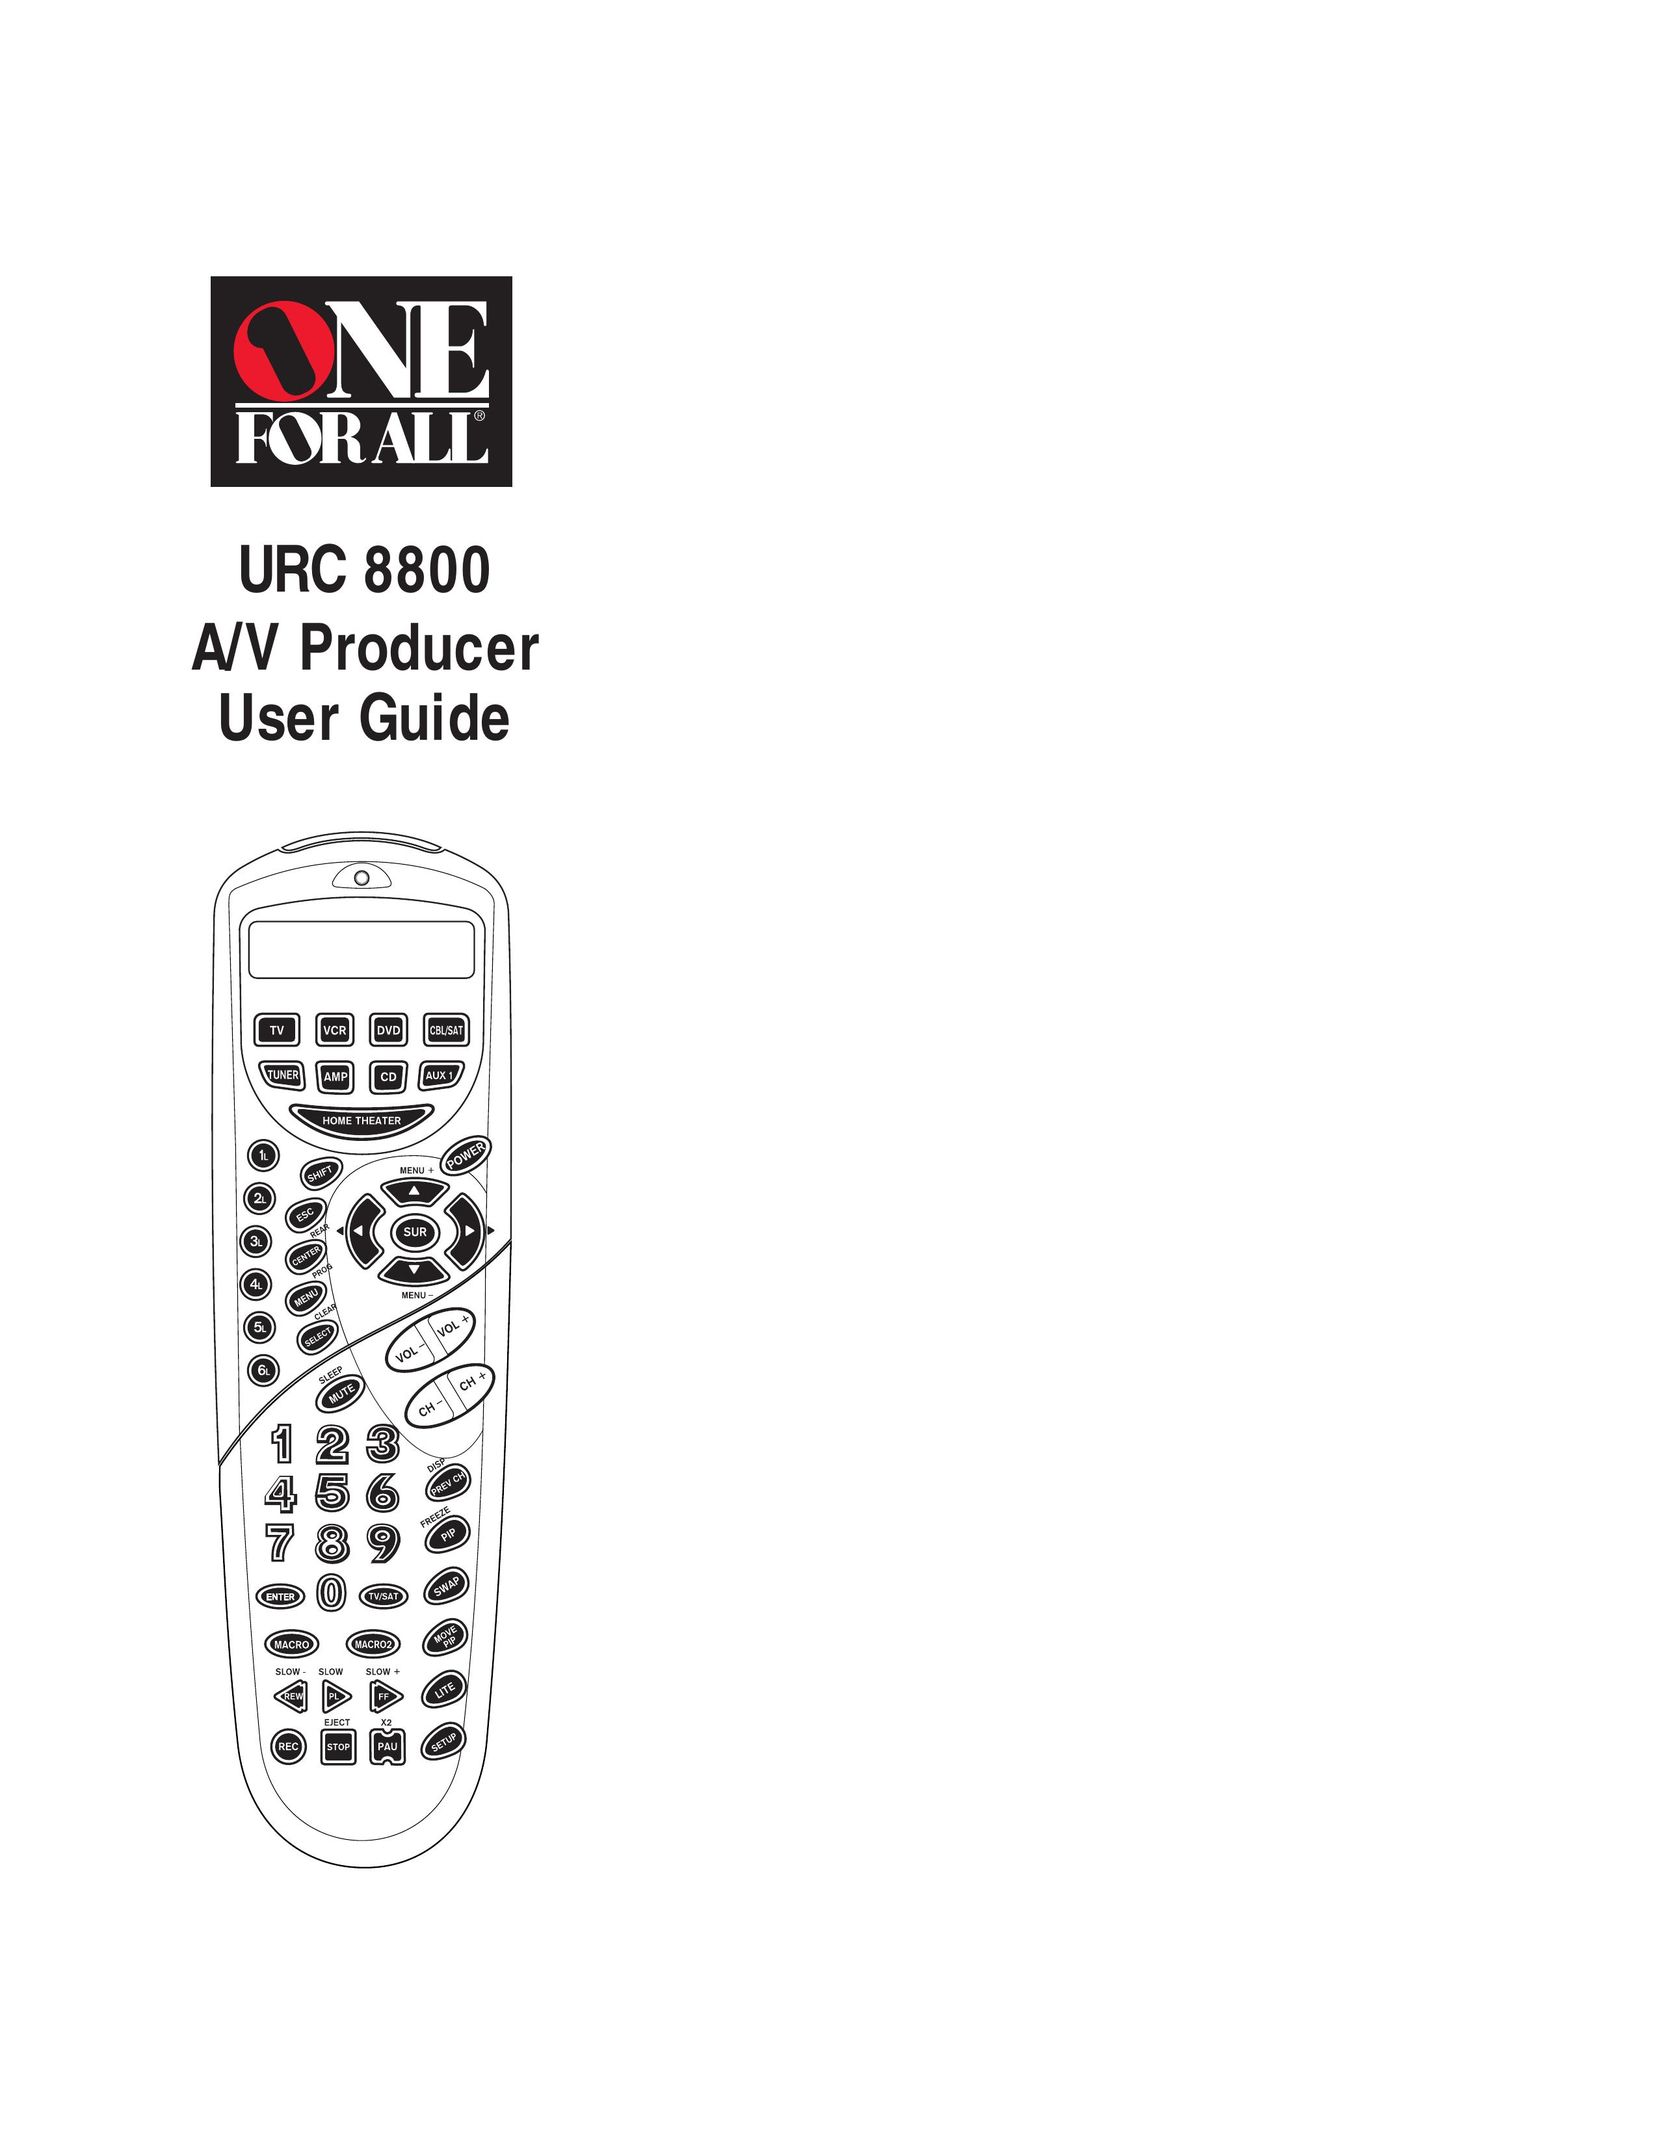 One for All URC 8800 Universal Remote User Manual